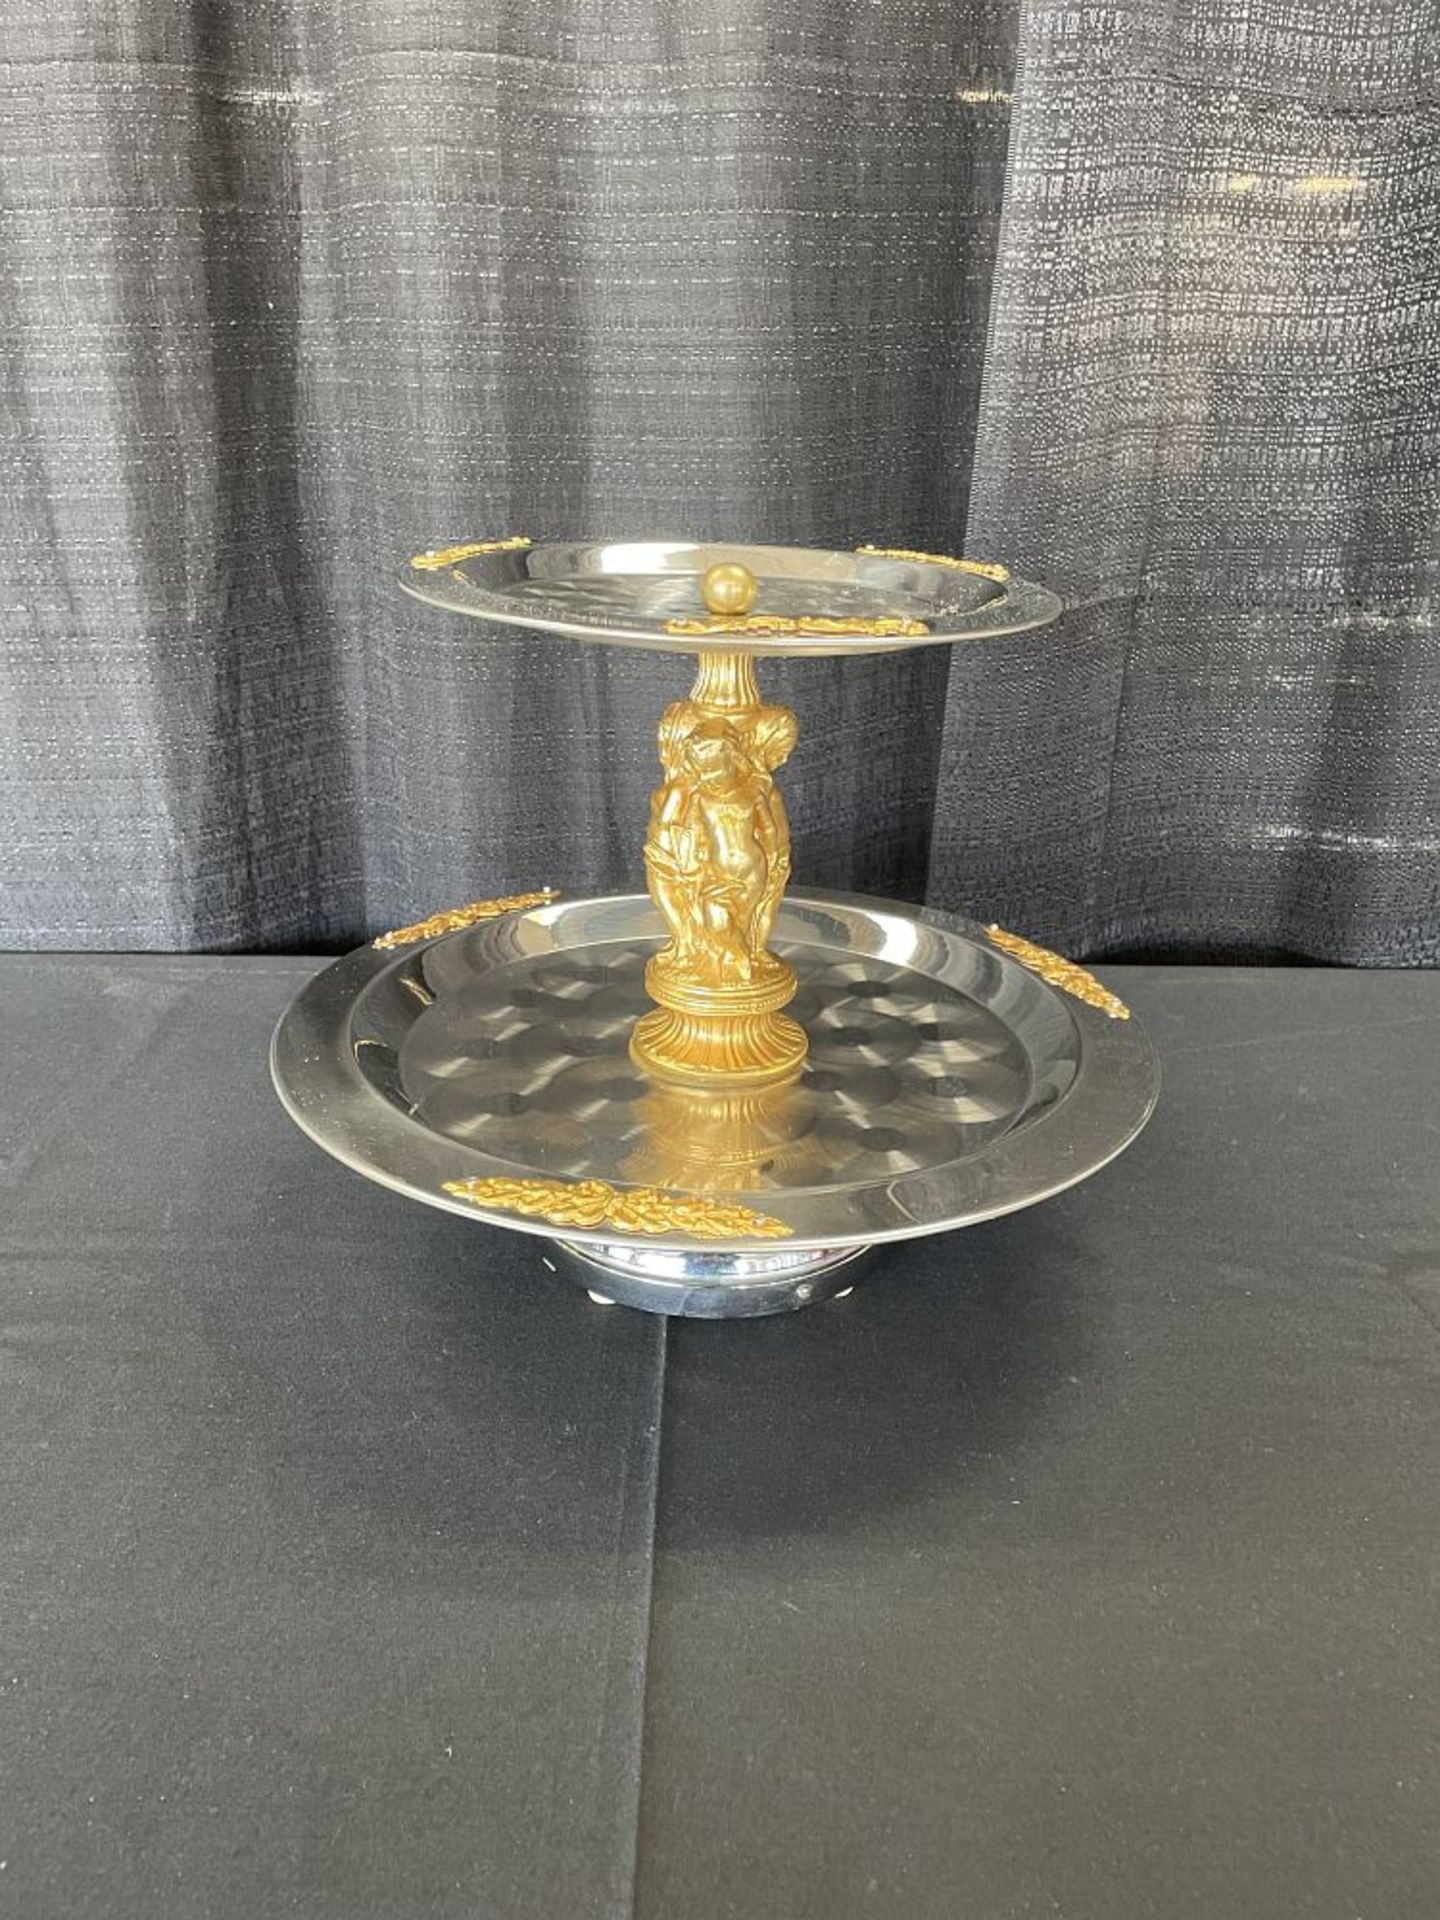 15" 2-tier Stainless Steel w/ Gold Accent Serving Display